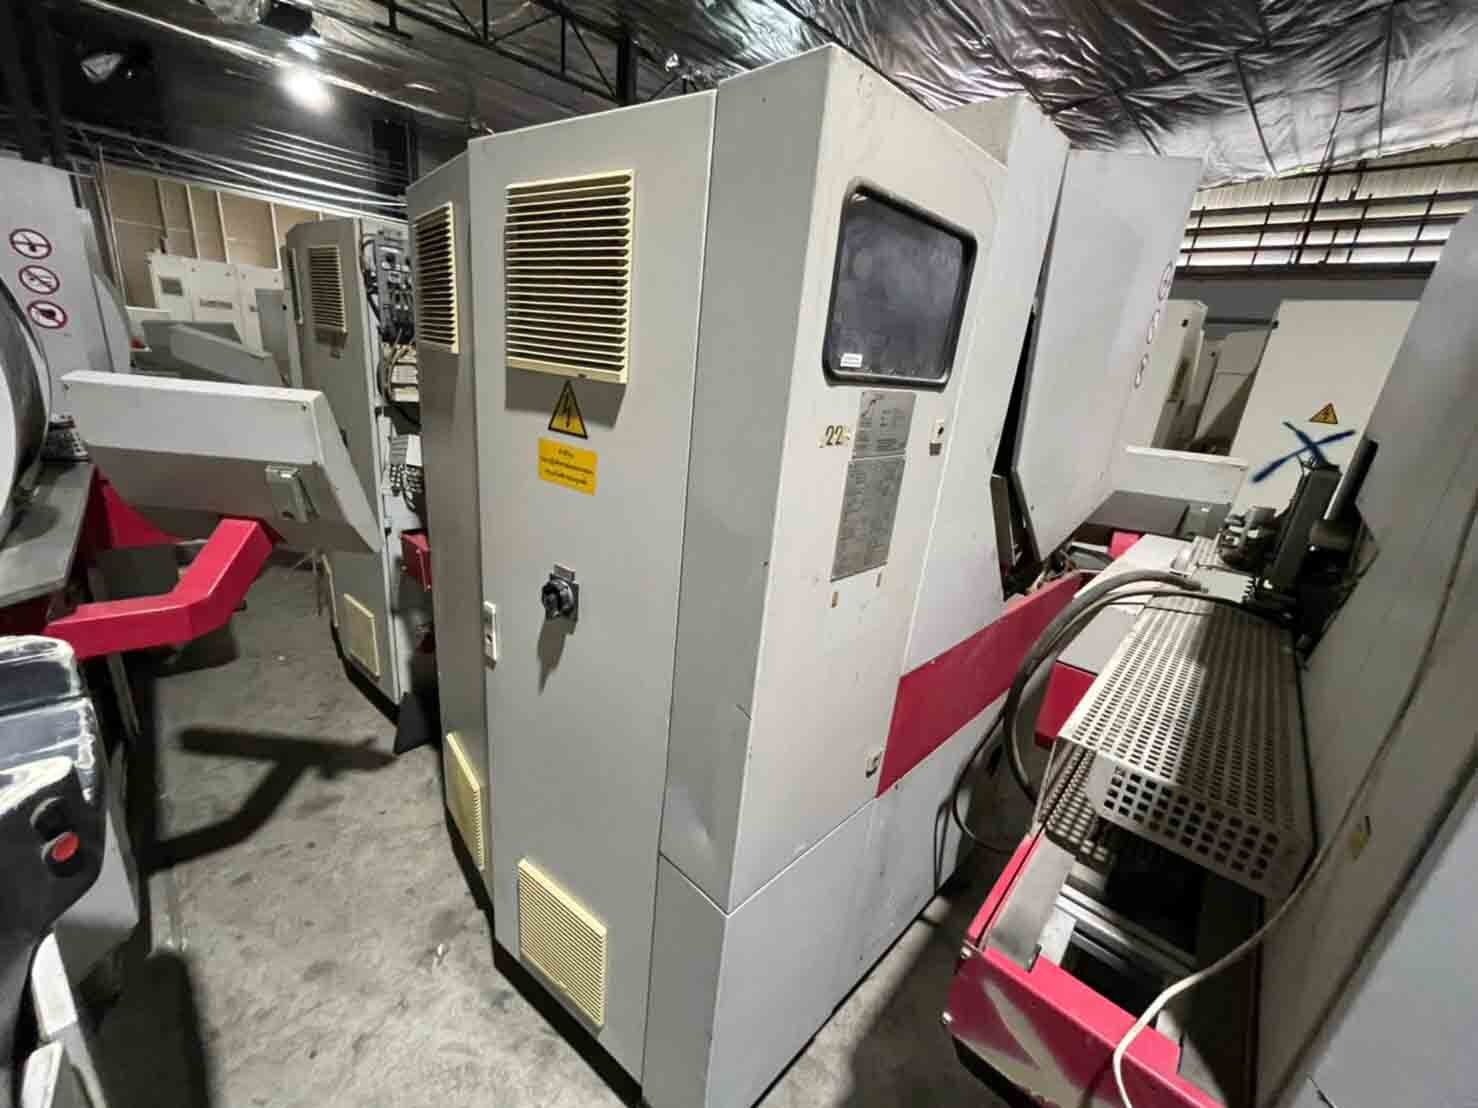 Photo Used SCHNEIDER HSC 101-GTH For Sale